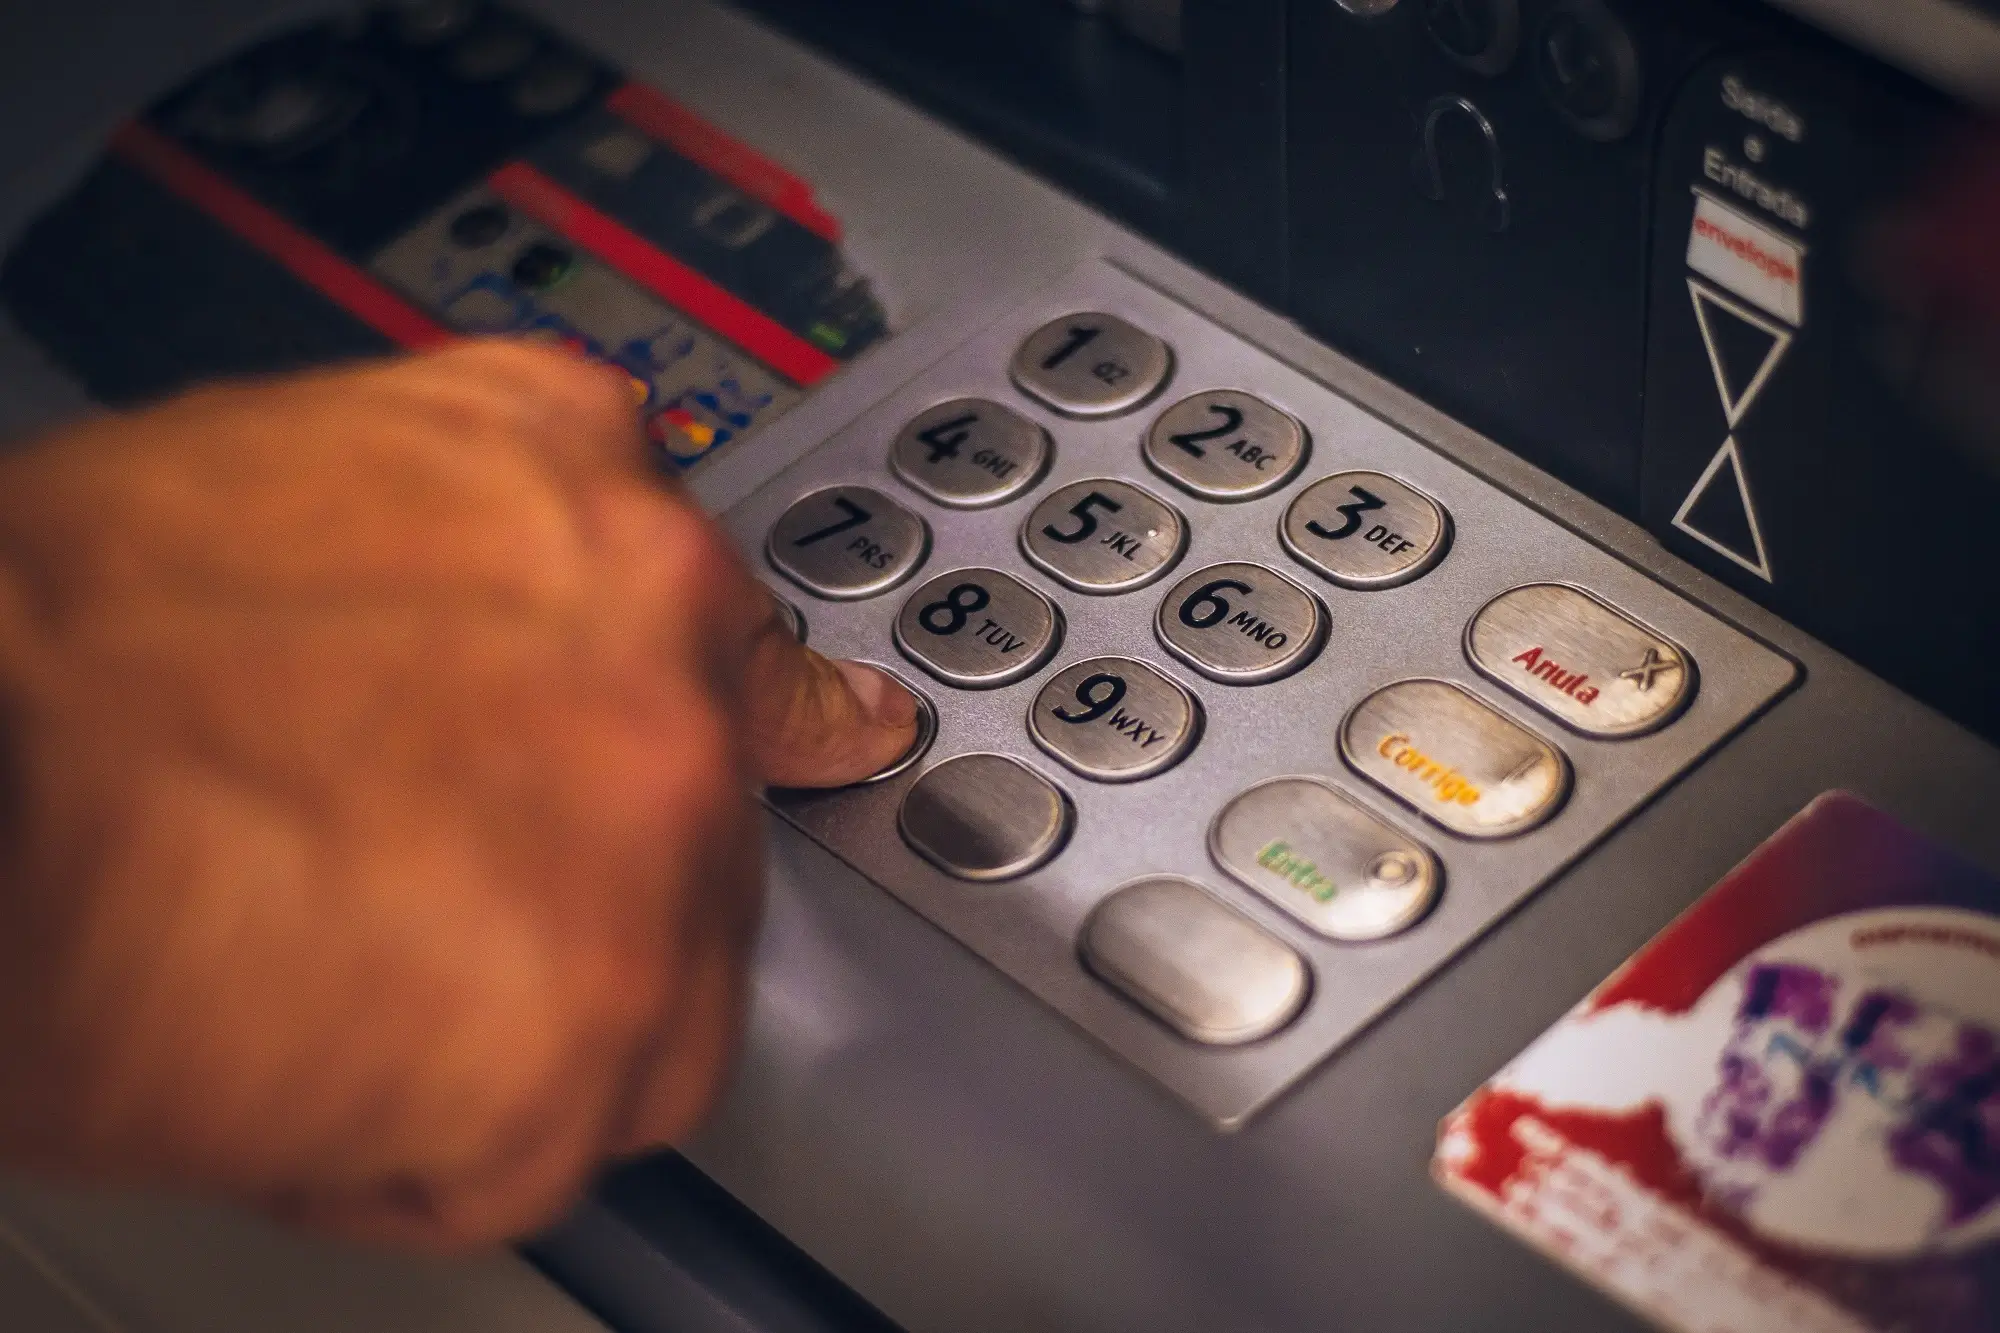 A hand pressing the keys on an ATM.